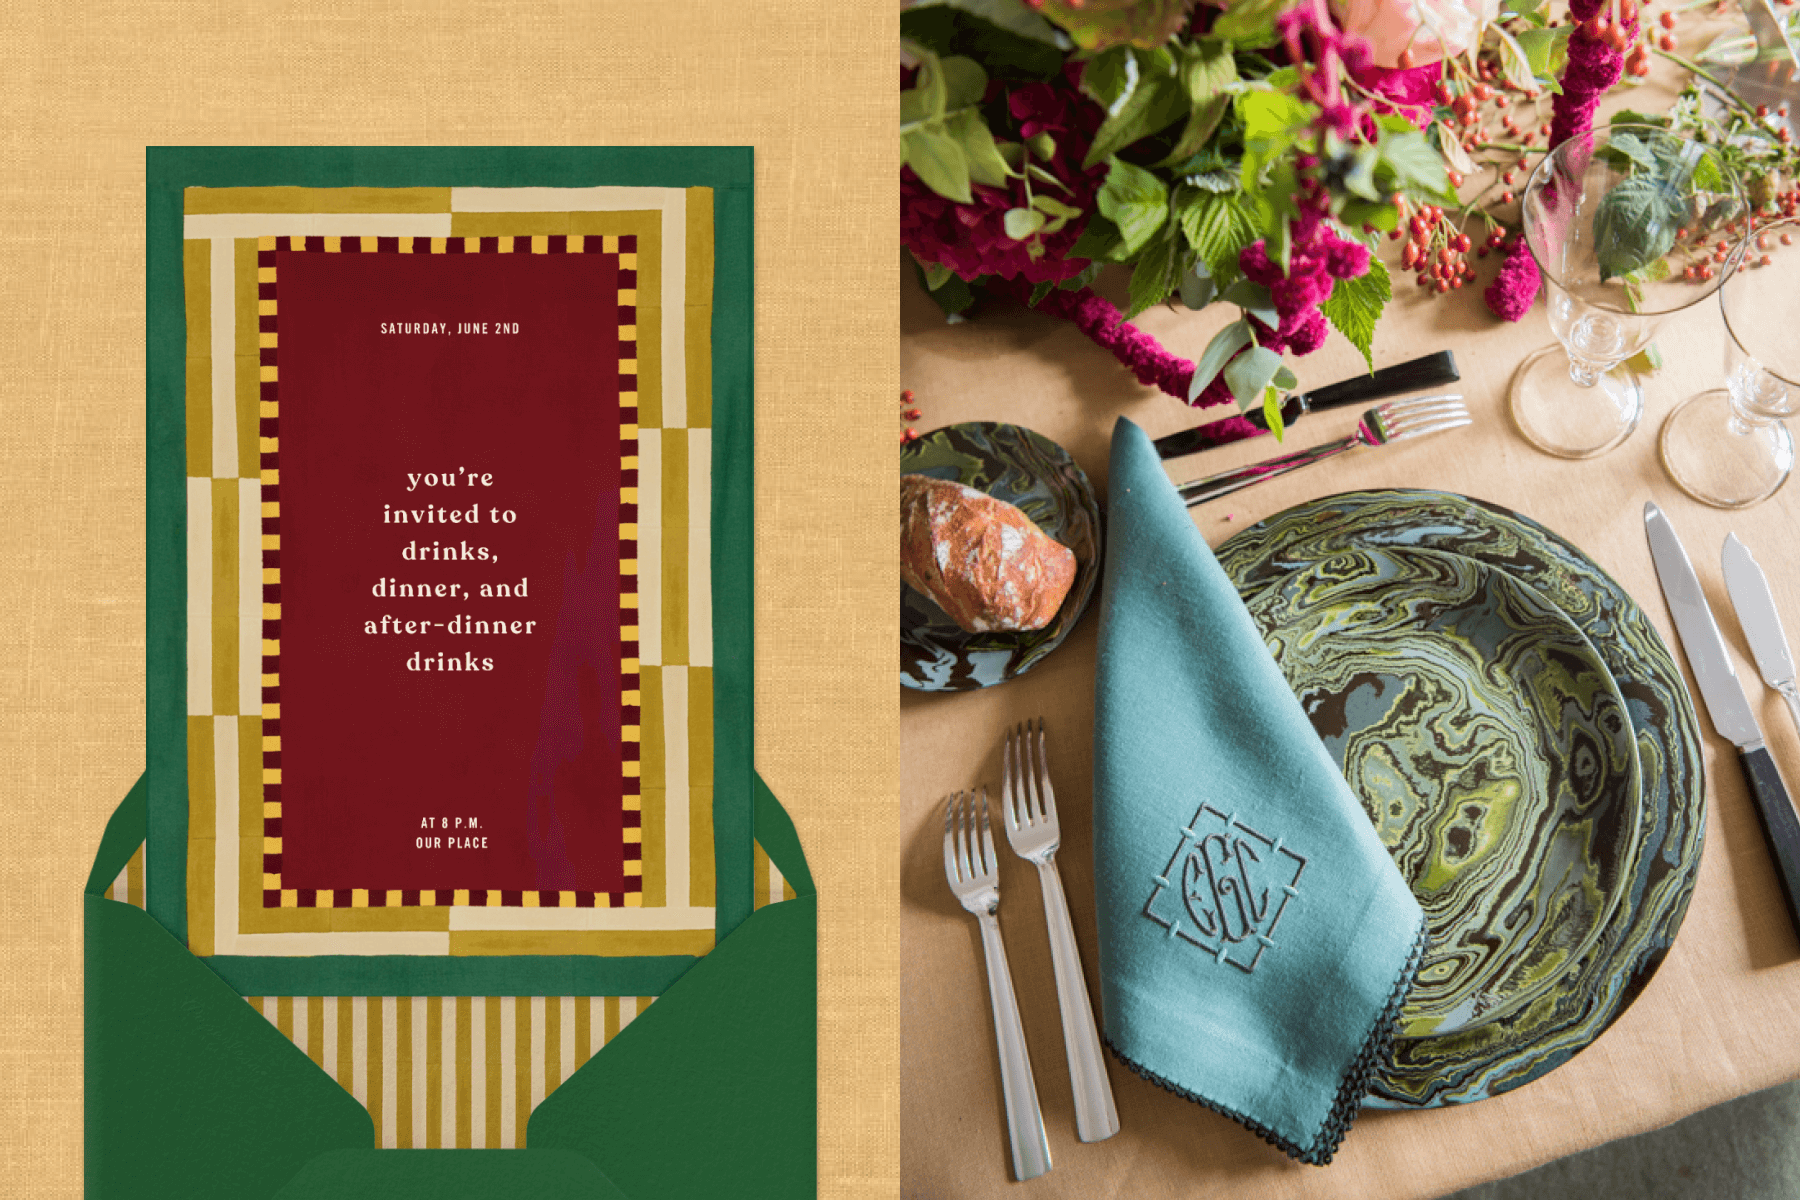 Left: Dinner Party invitation with Maroon background and yellow and green geometric border, coming out of a green envelope. Right: Dinner table set with a green marbled plate, matching green napkin, and a fuchsia flower arrangement. 